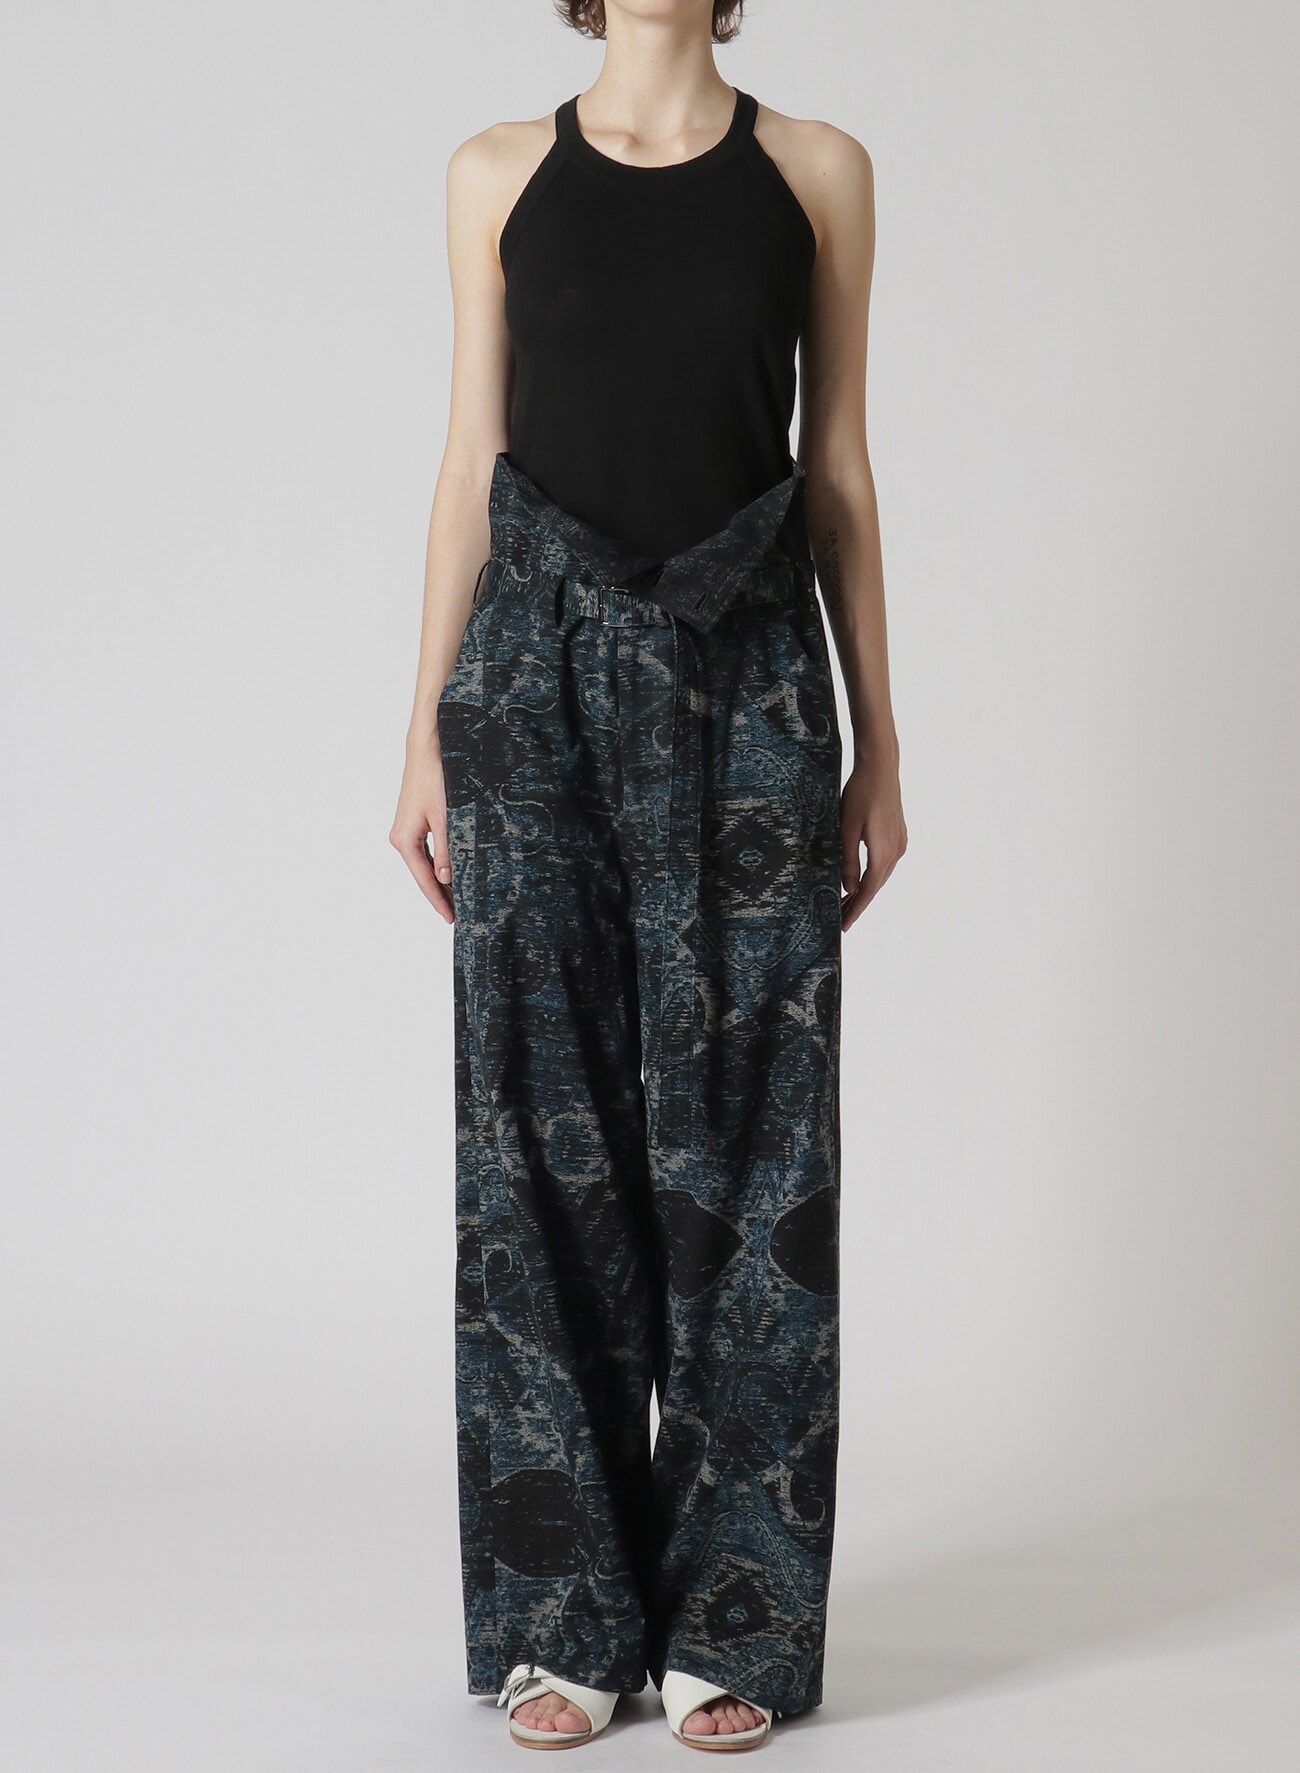 HIGH WAISTED PANTS WITH INDIAN JACQUARD PRINT